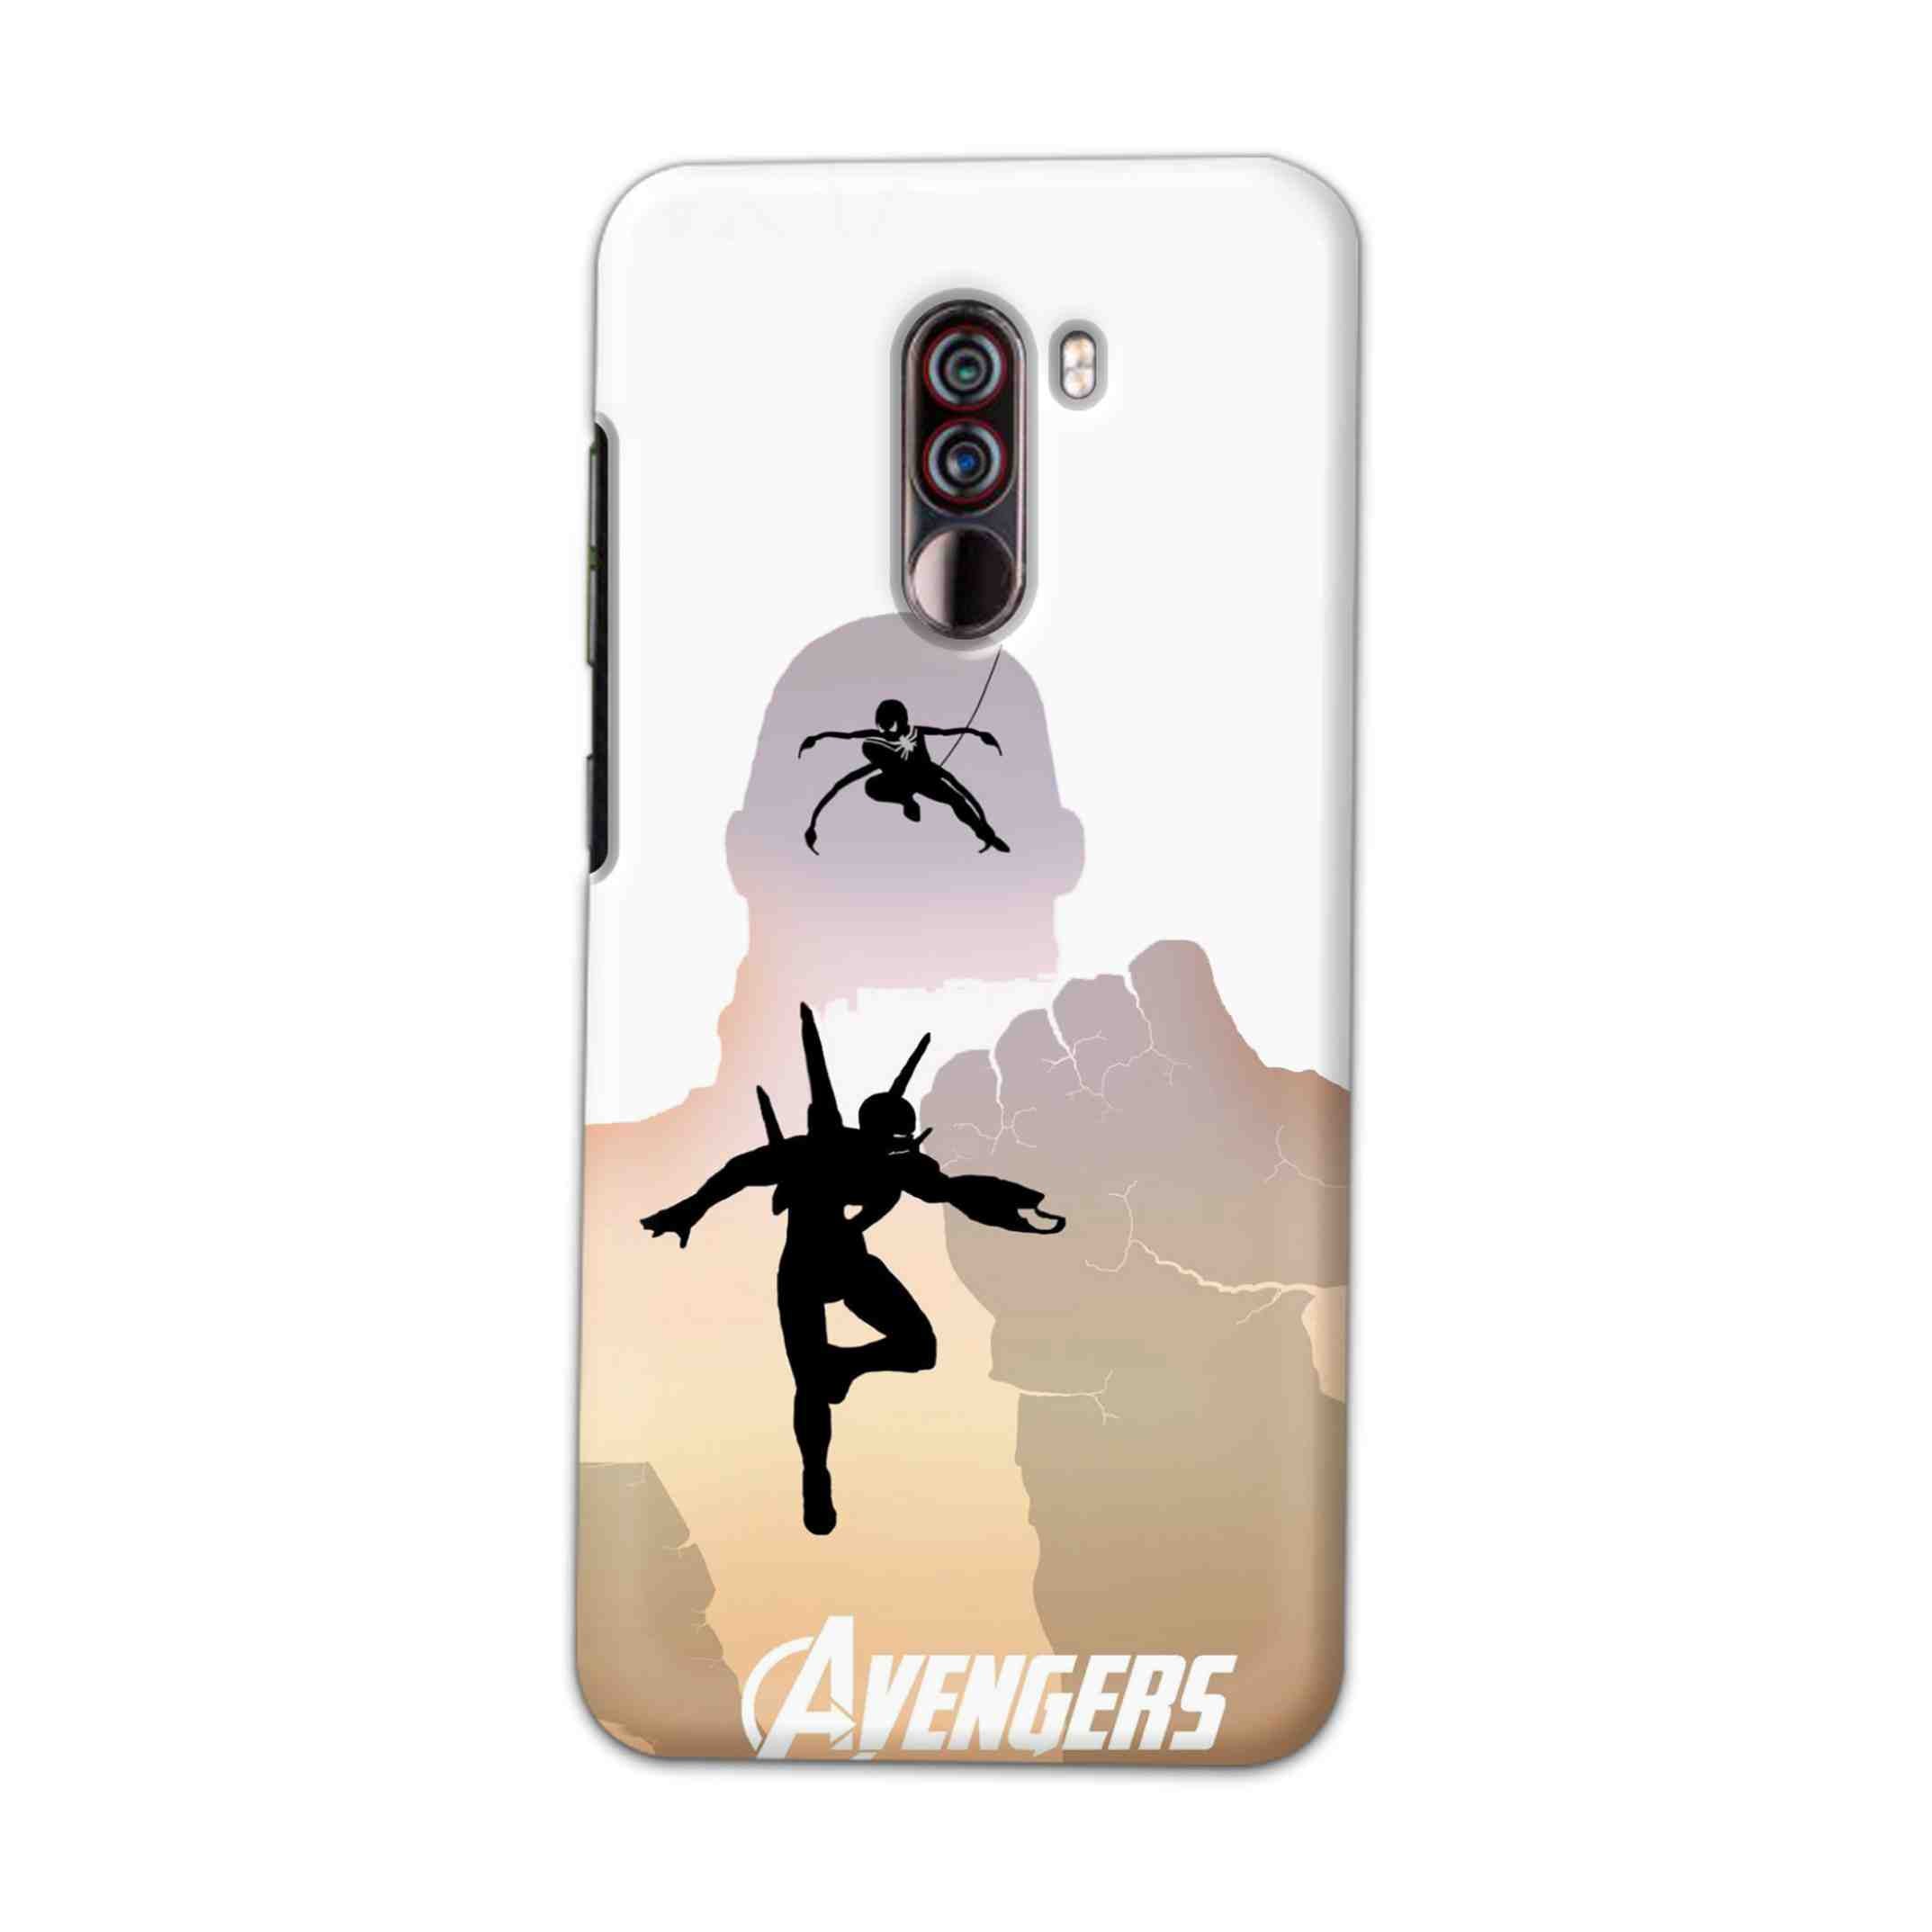 Buy Iron Man Vs Spiderman Hard Back Mobile Phone Case Cover For Xiaomi Pocophone F1 Online